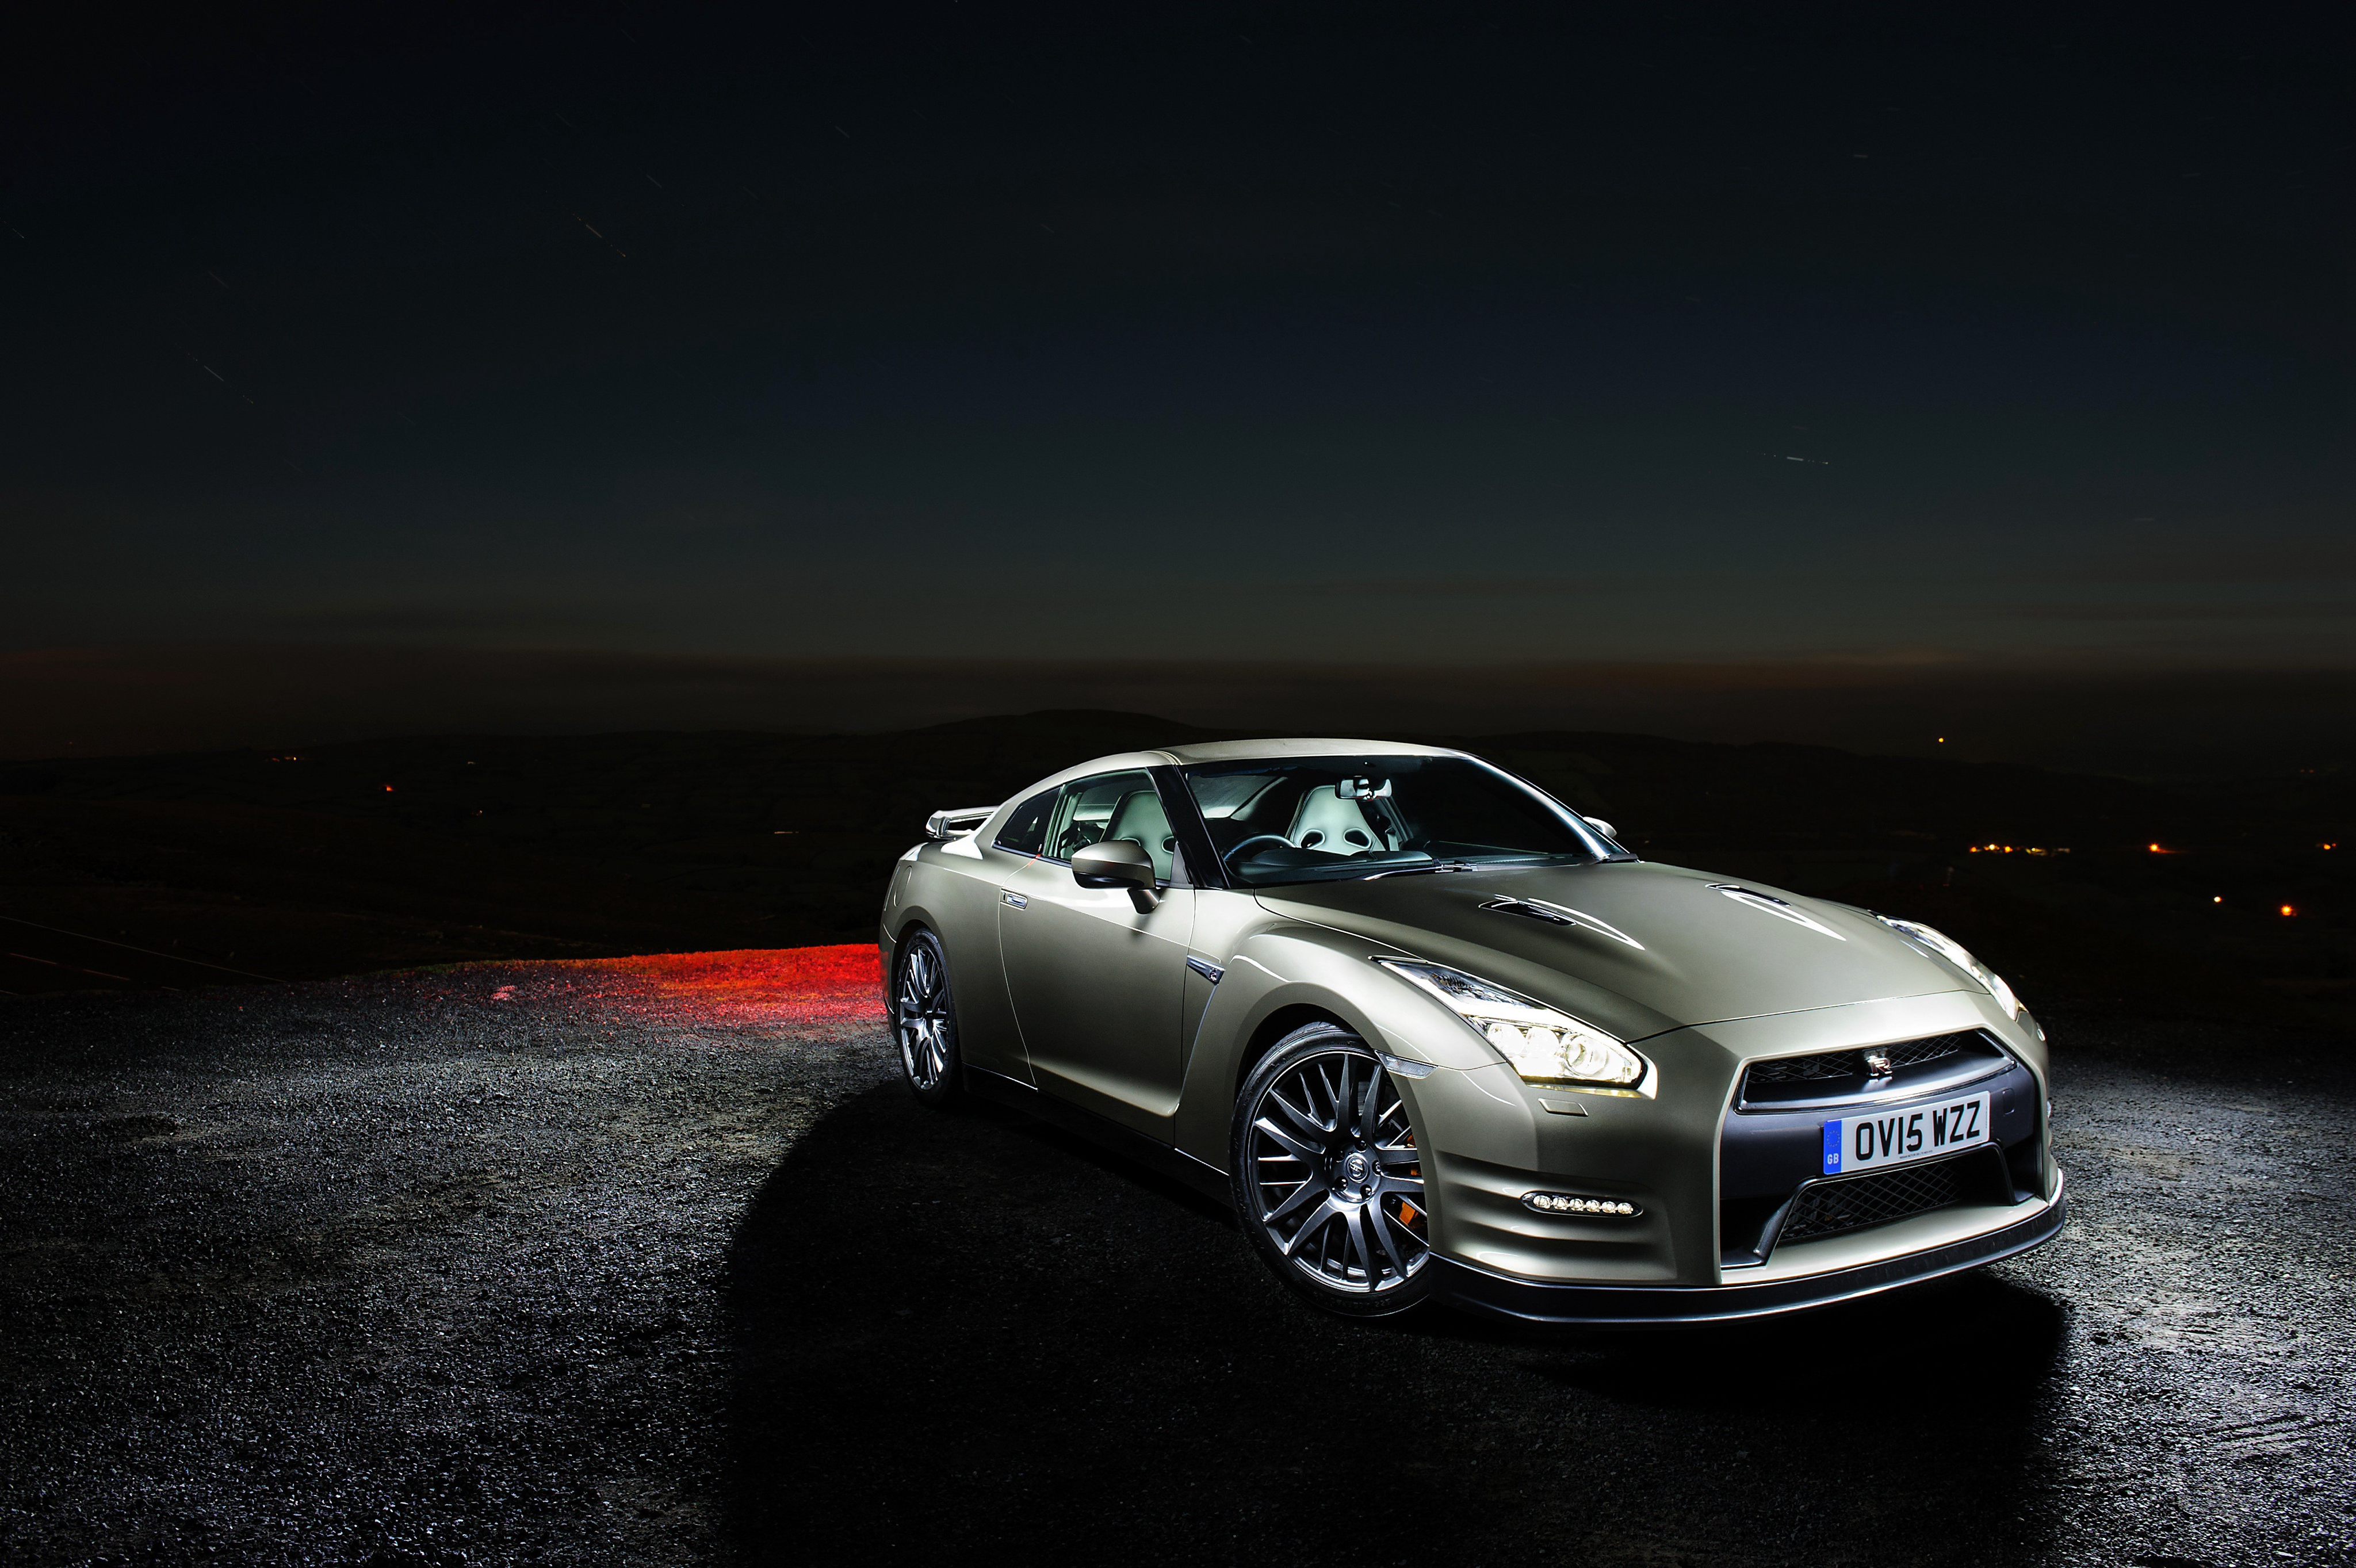 gt r, nissan, night, cars, side view